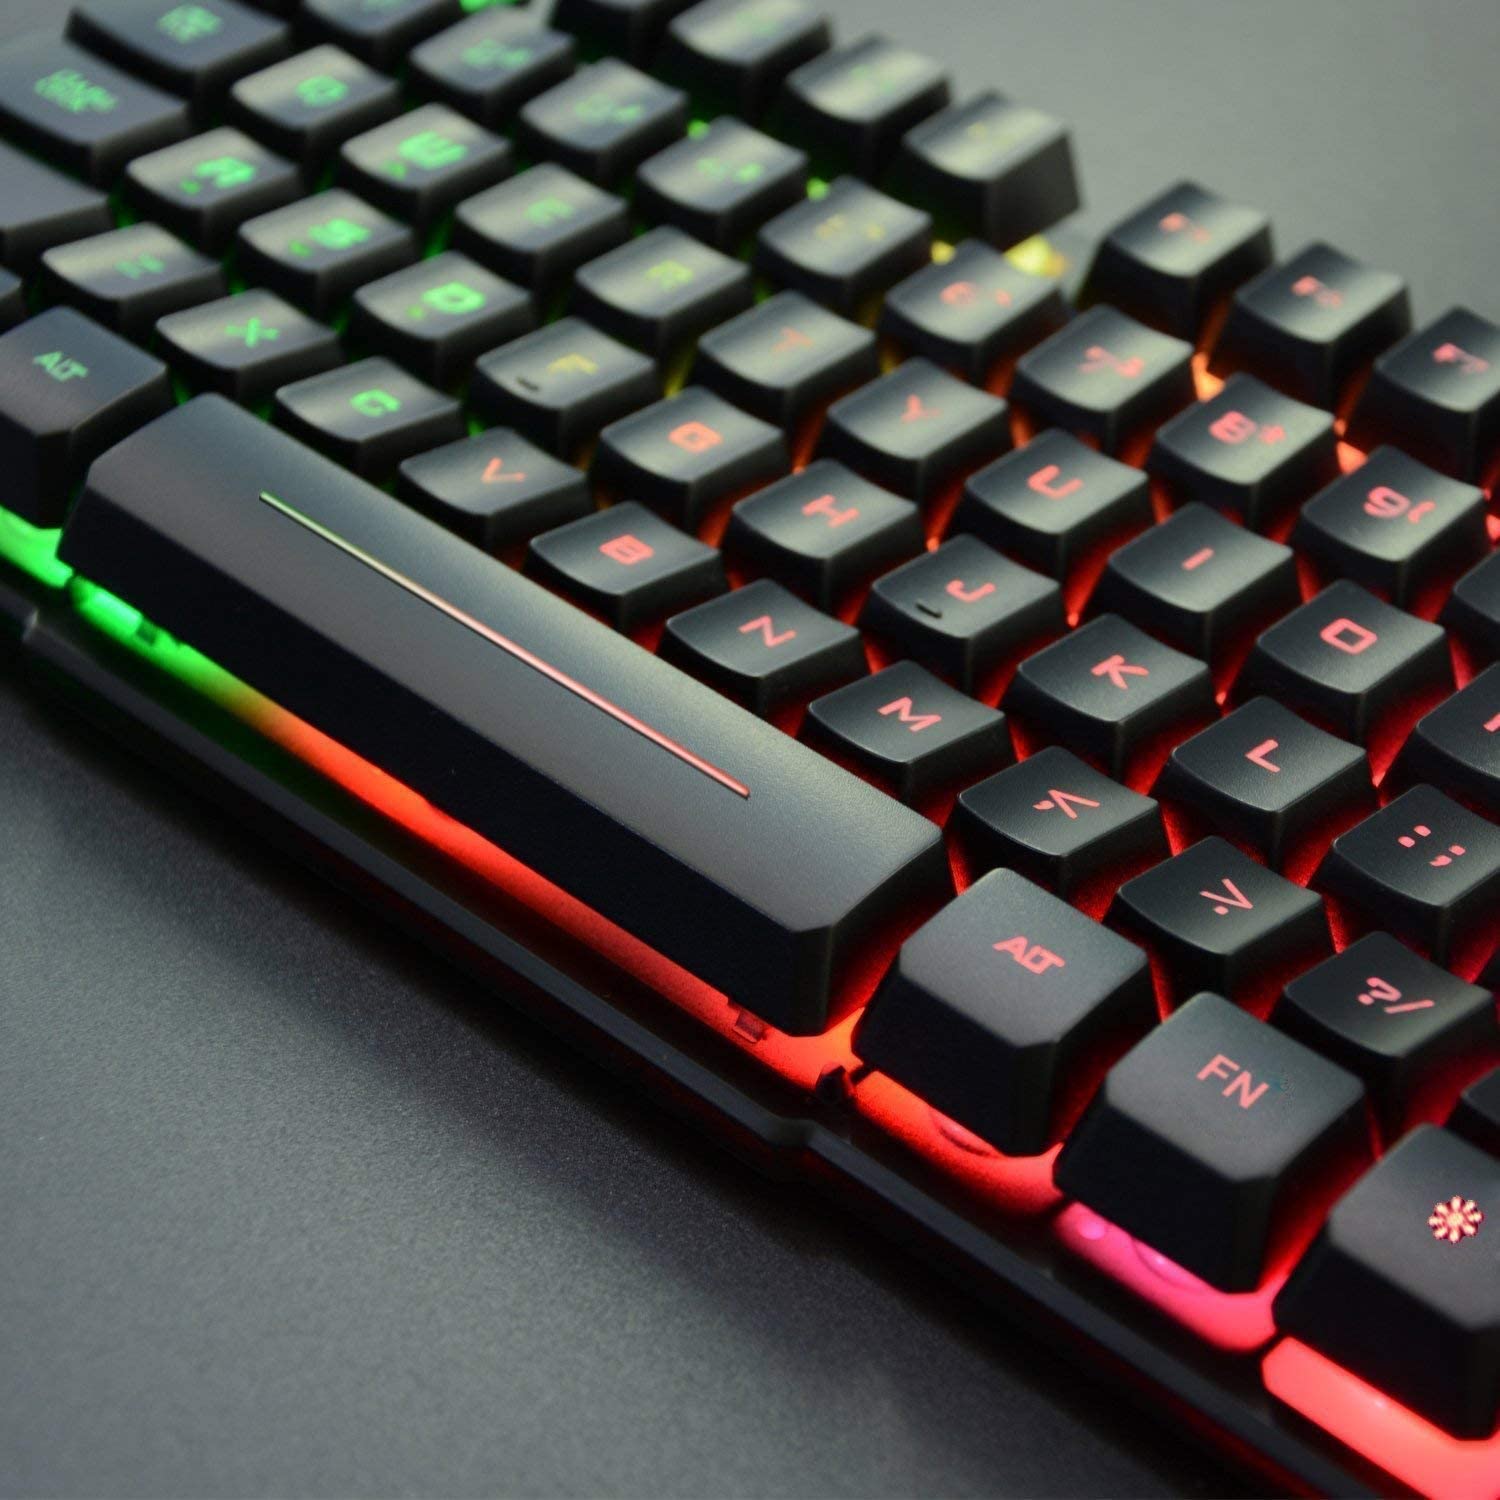 Rii RK100+ Multiple Color Rainbow LED Backlit Large Size USB Wired Mechanical Feeling Multimedia PC Gaming Keyboard,Office Keyboard for Working or Primer Gaming,Office Device (US Layout) - image 4 of 7